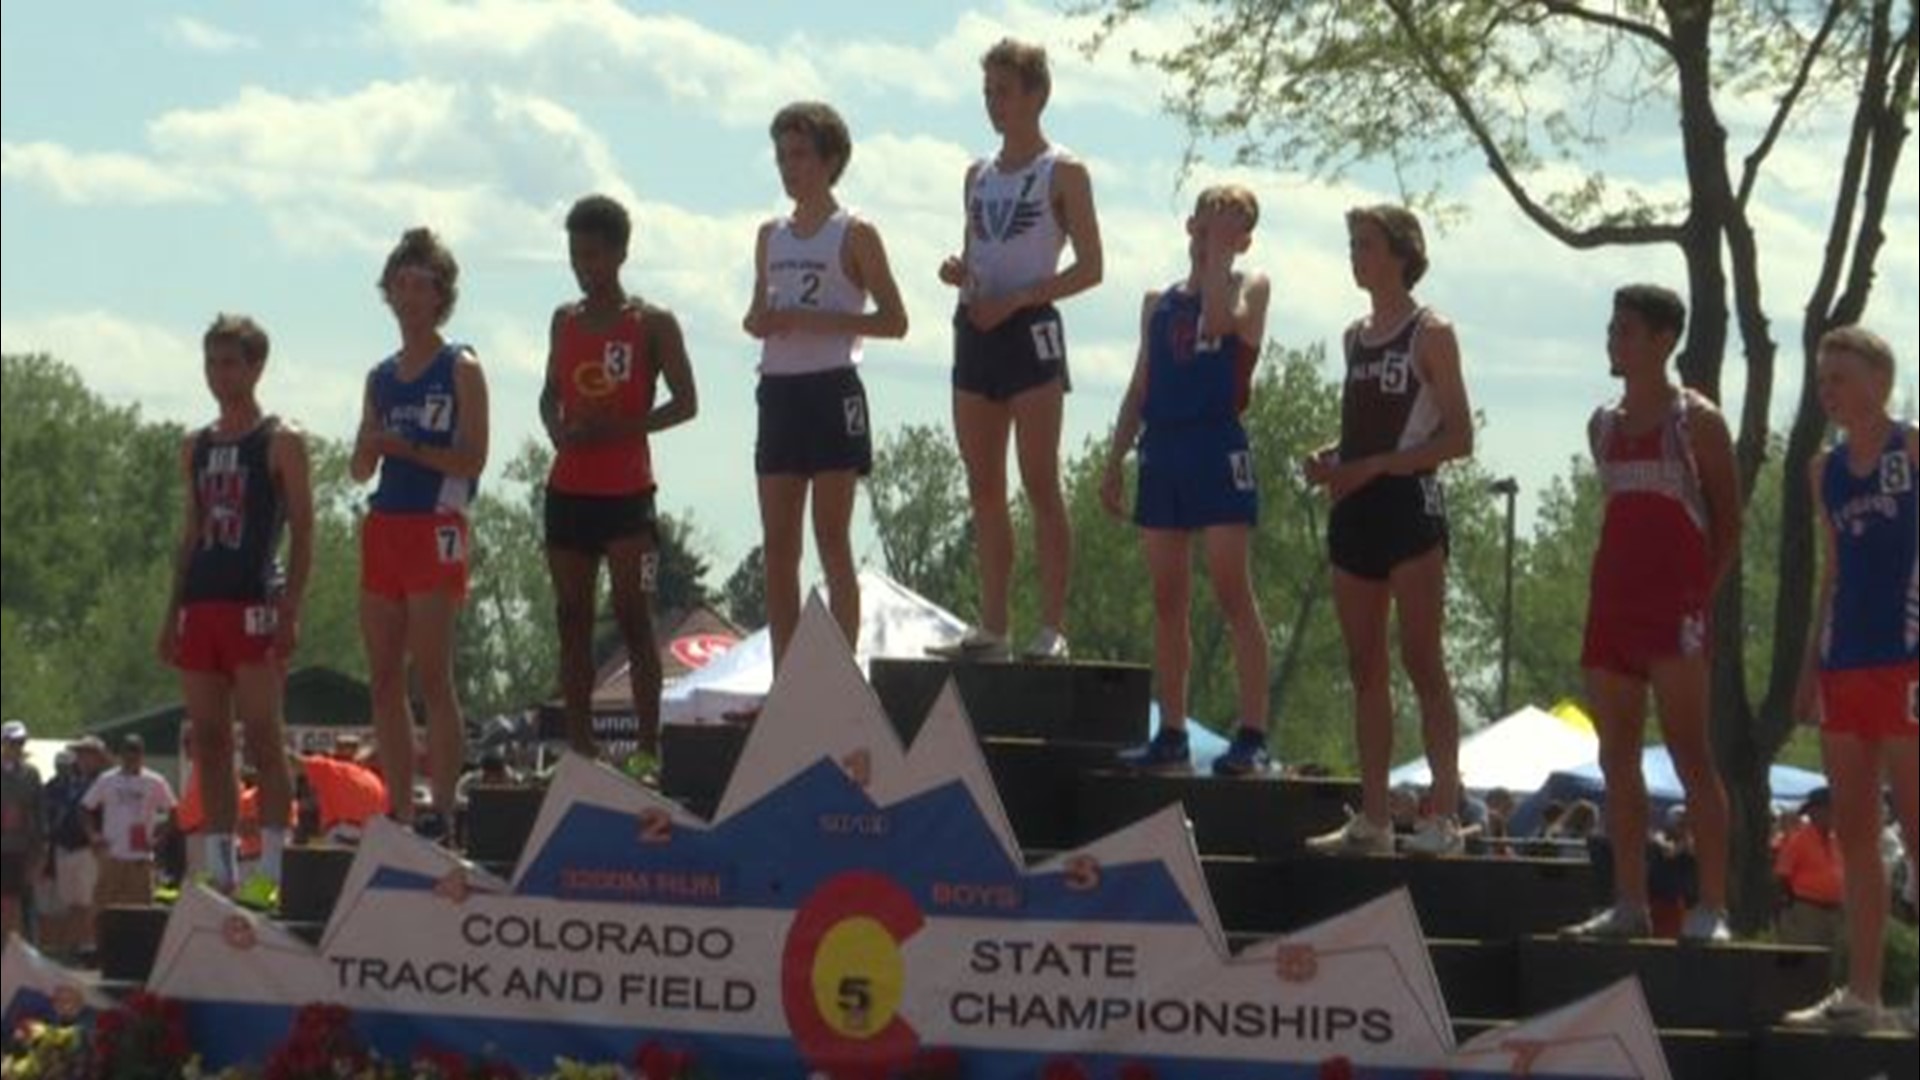 Valor Christian senior Cole Sprout cemented his legacy as one of the best distance runners in the state this spring, after breaking a 39-year-old 1,600 meter record.